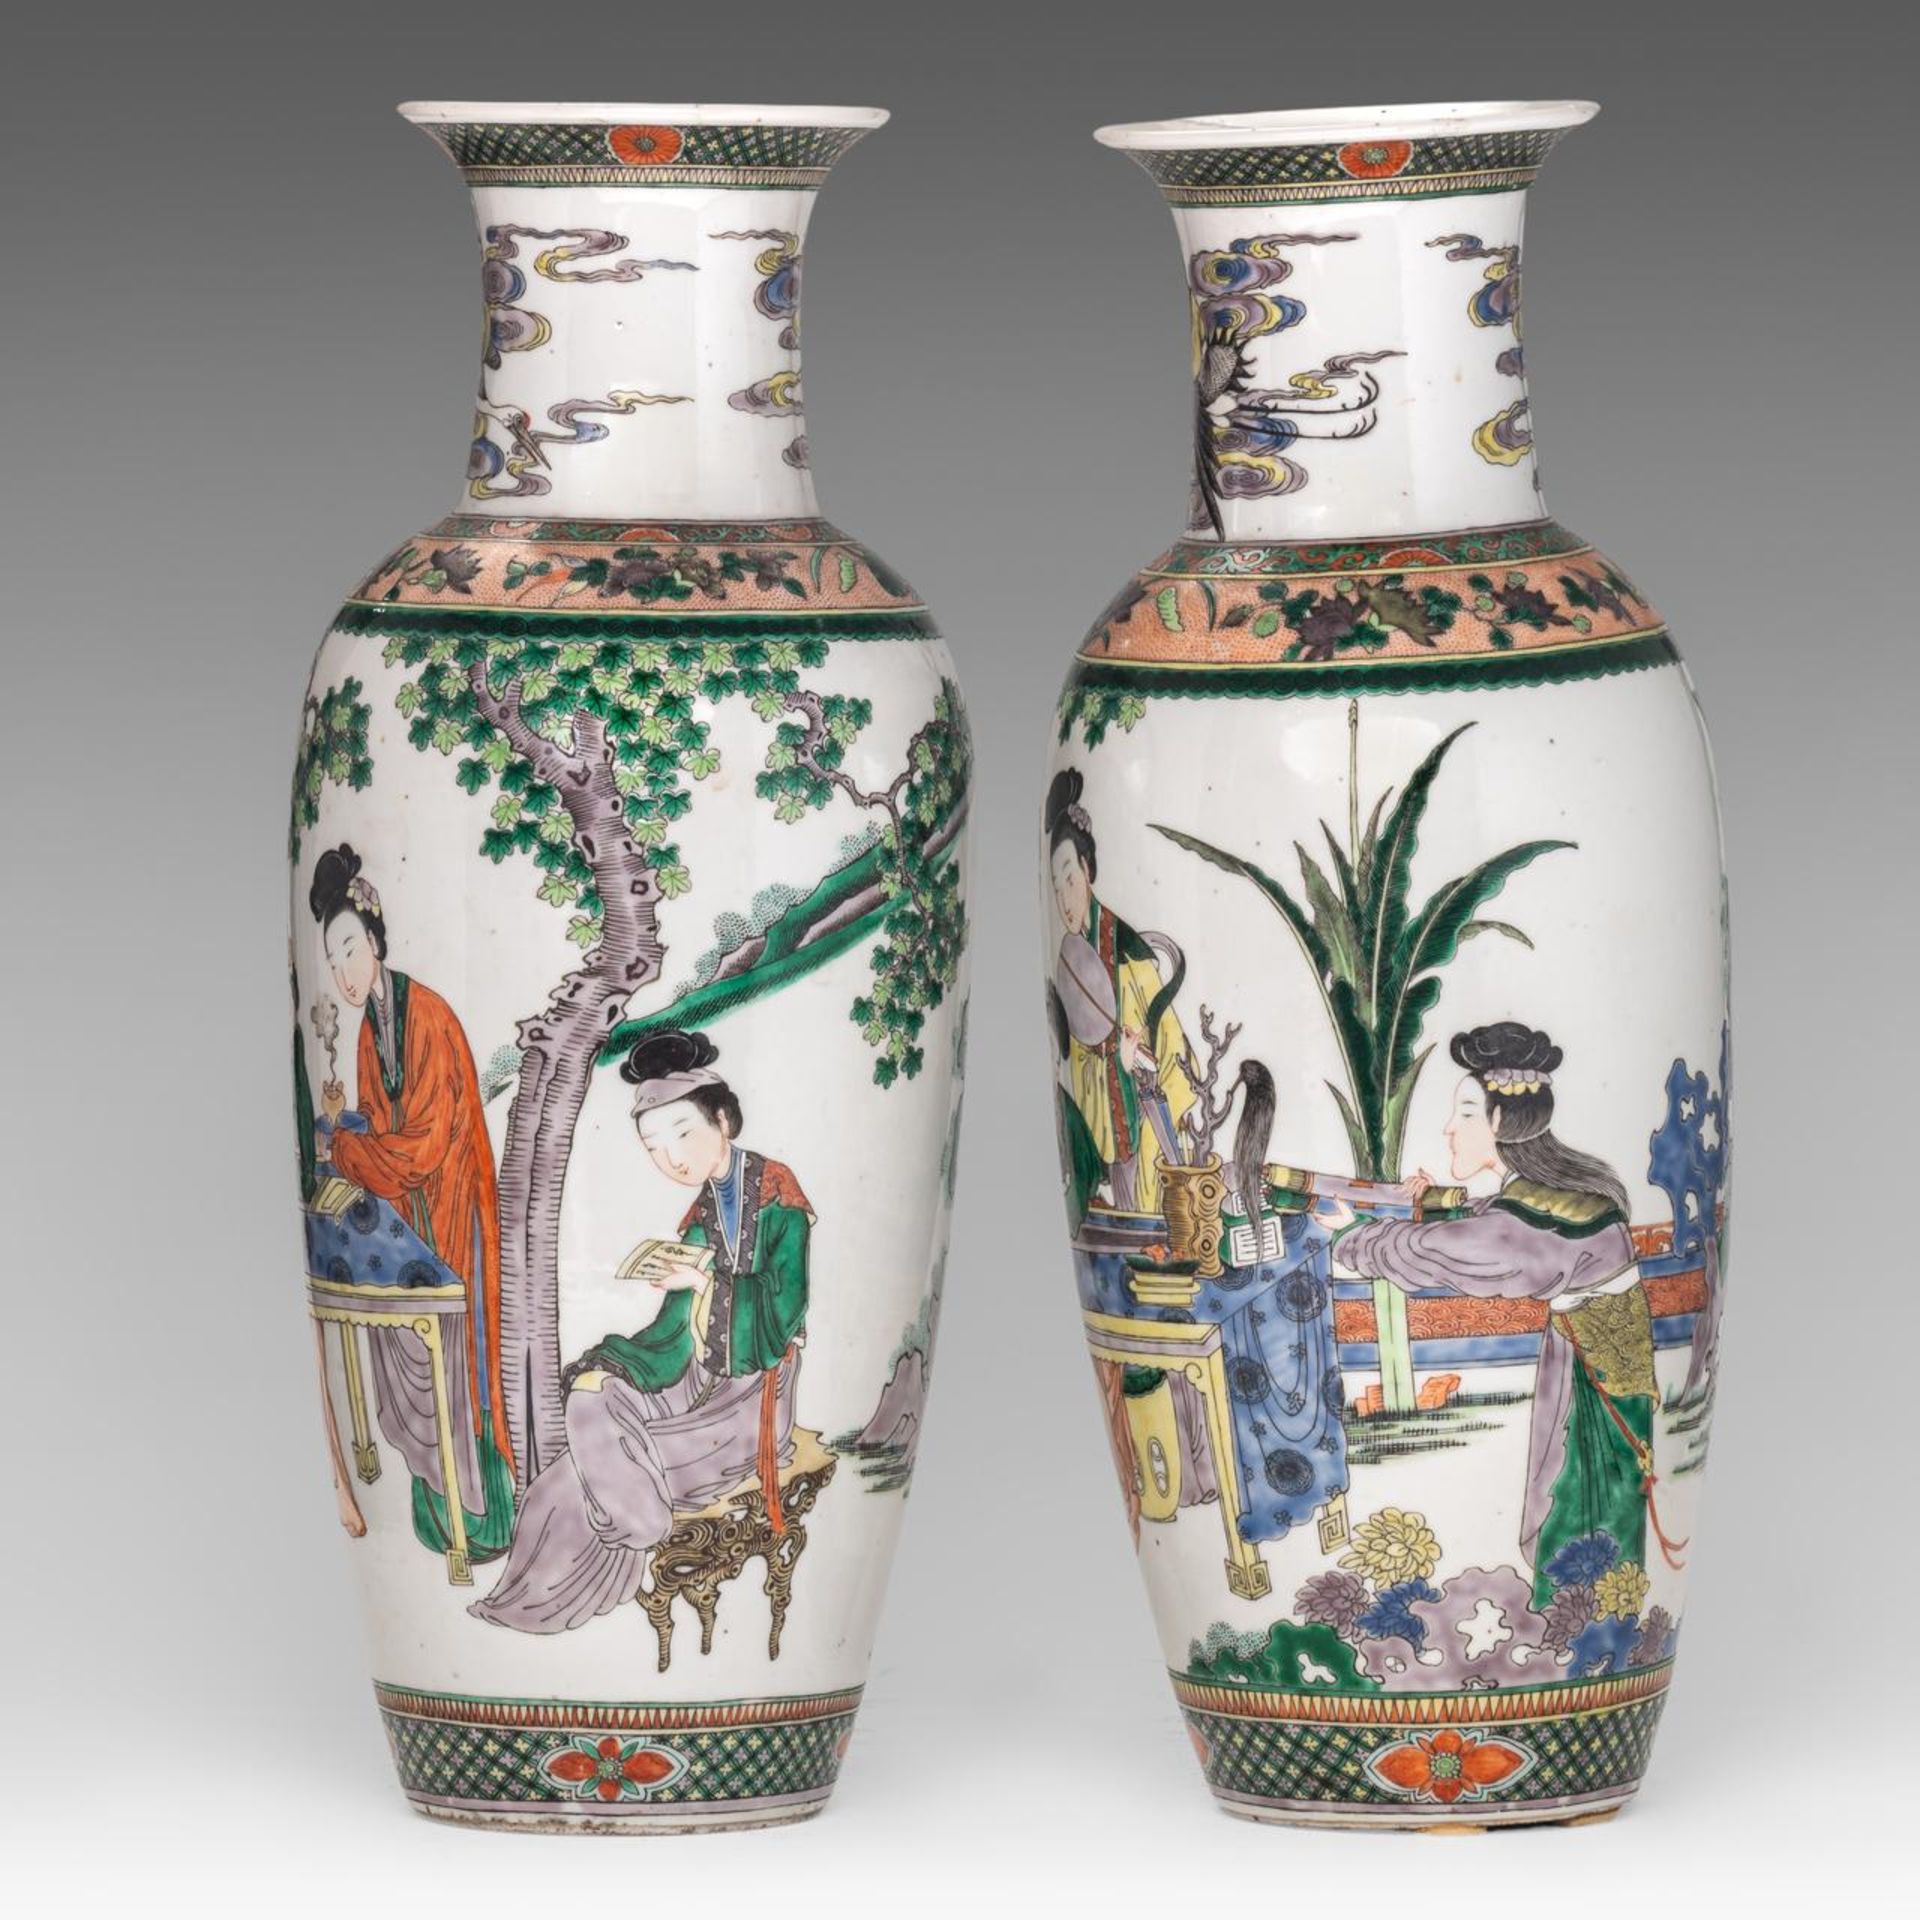 A pair of Chinese famille verte 'Ladies in a garden' vases, Guangxu/ Republic period, H 46,5 cm - Image 2 of 6